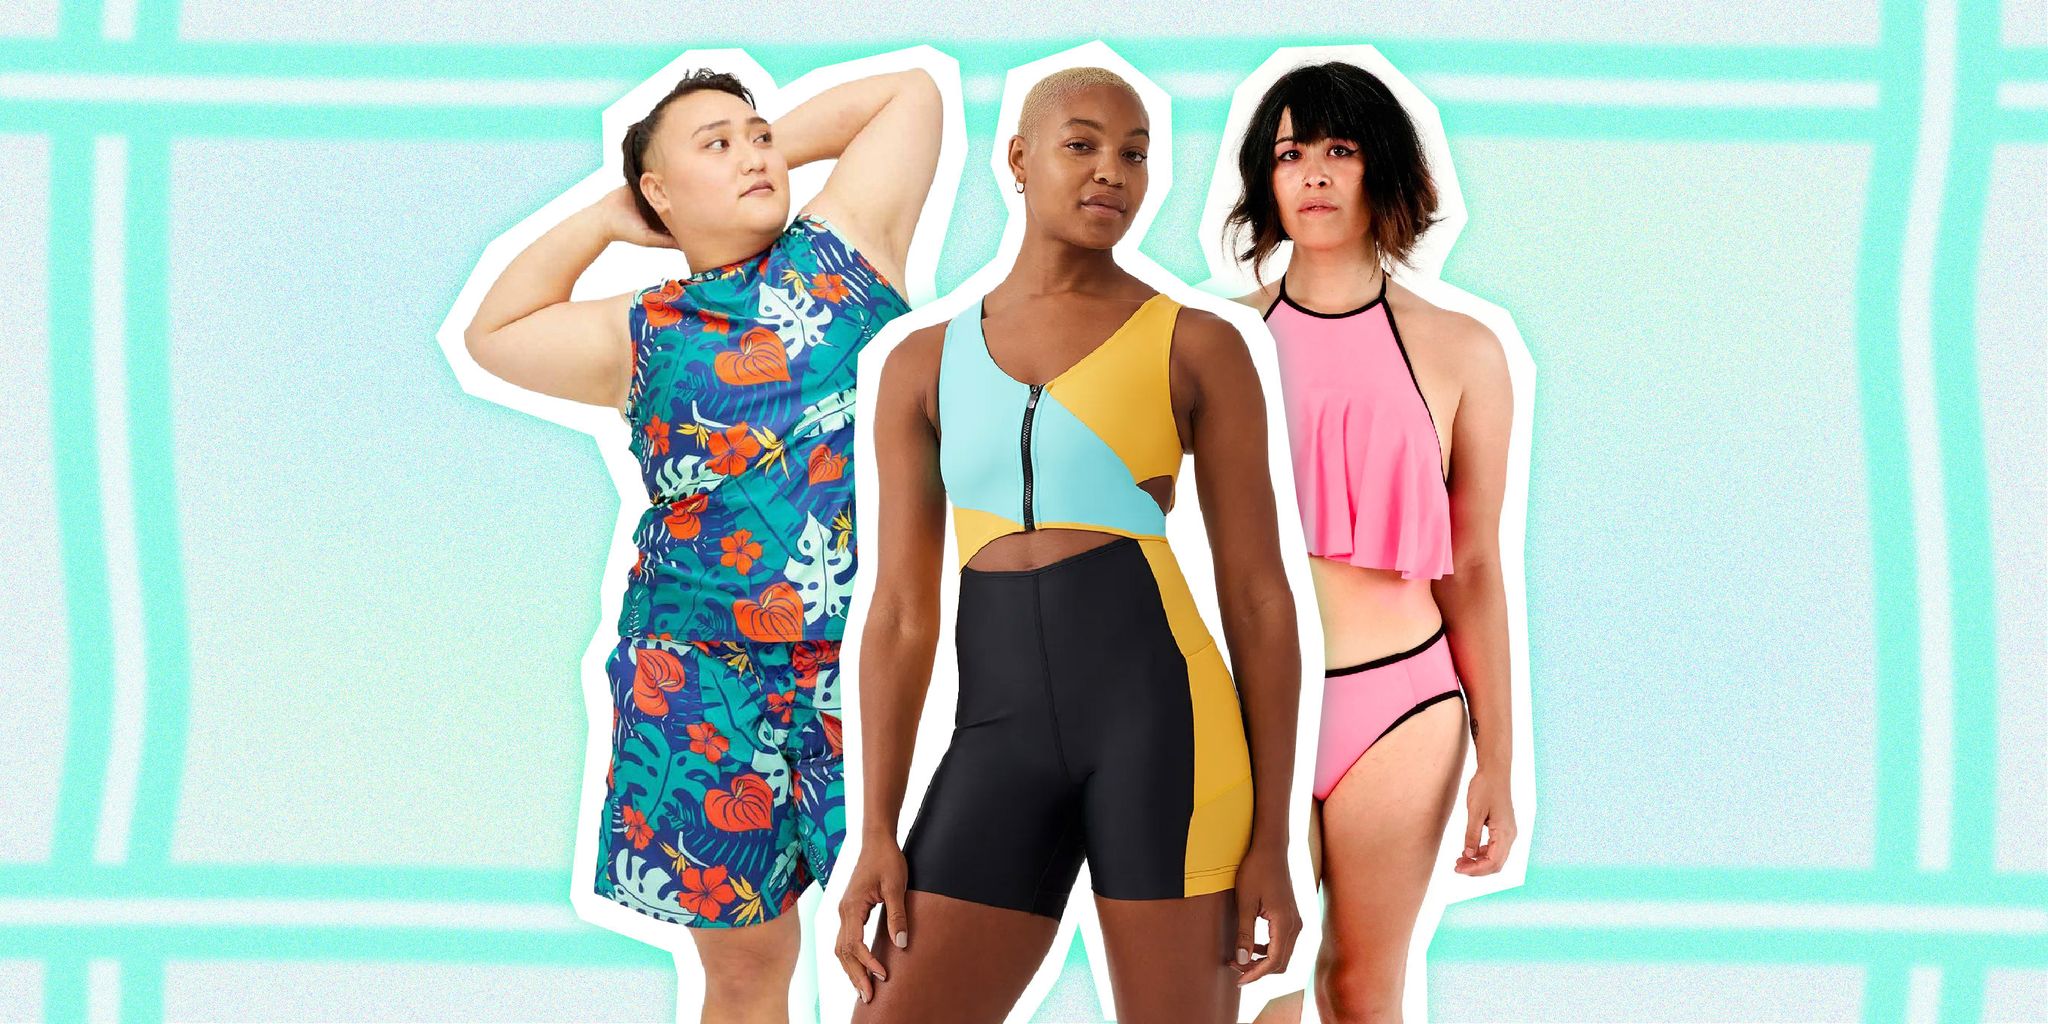 Swimsuits For All sale: Swimsuit has hundreds of 5-star reviews — and it's  more than 50% off